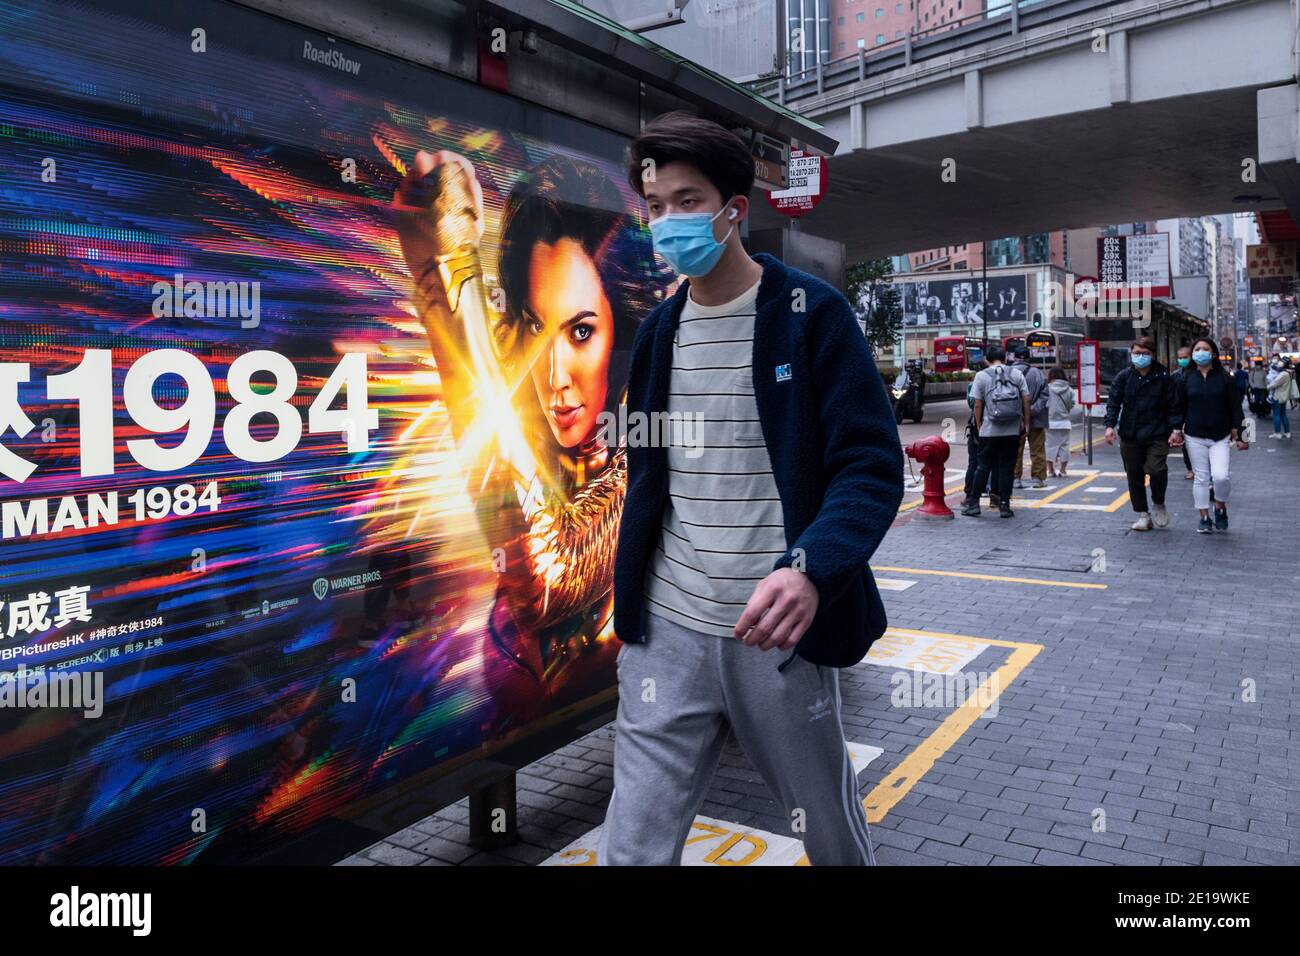 A pedestrian walks past an advertisement billboard from Warner Bros Official Site and DC comics character Wonder Woman 1984 movie in Hong Kong. Stock Photo